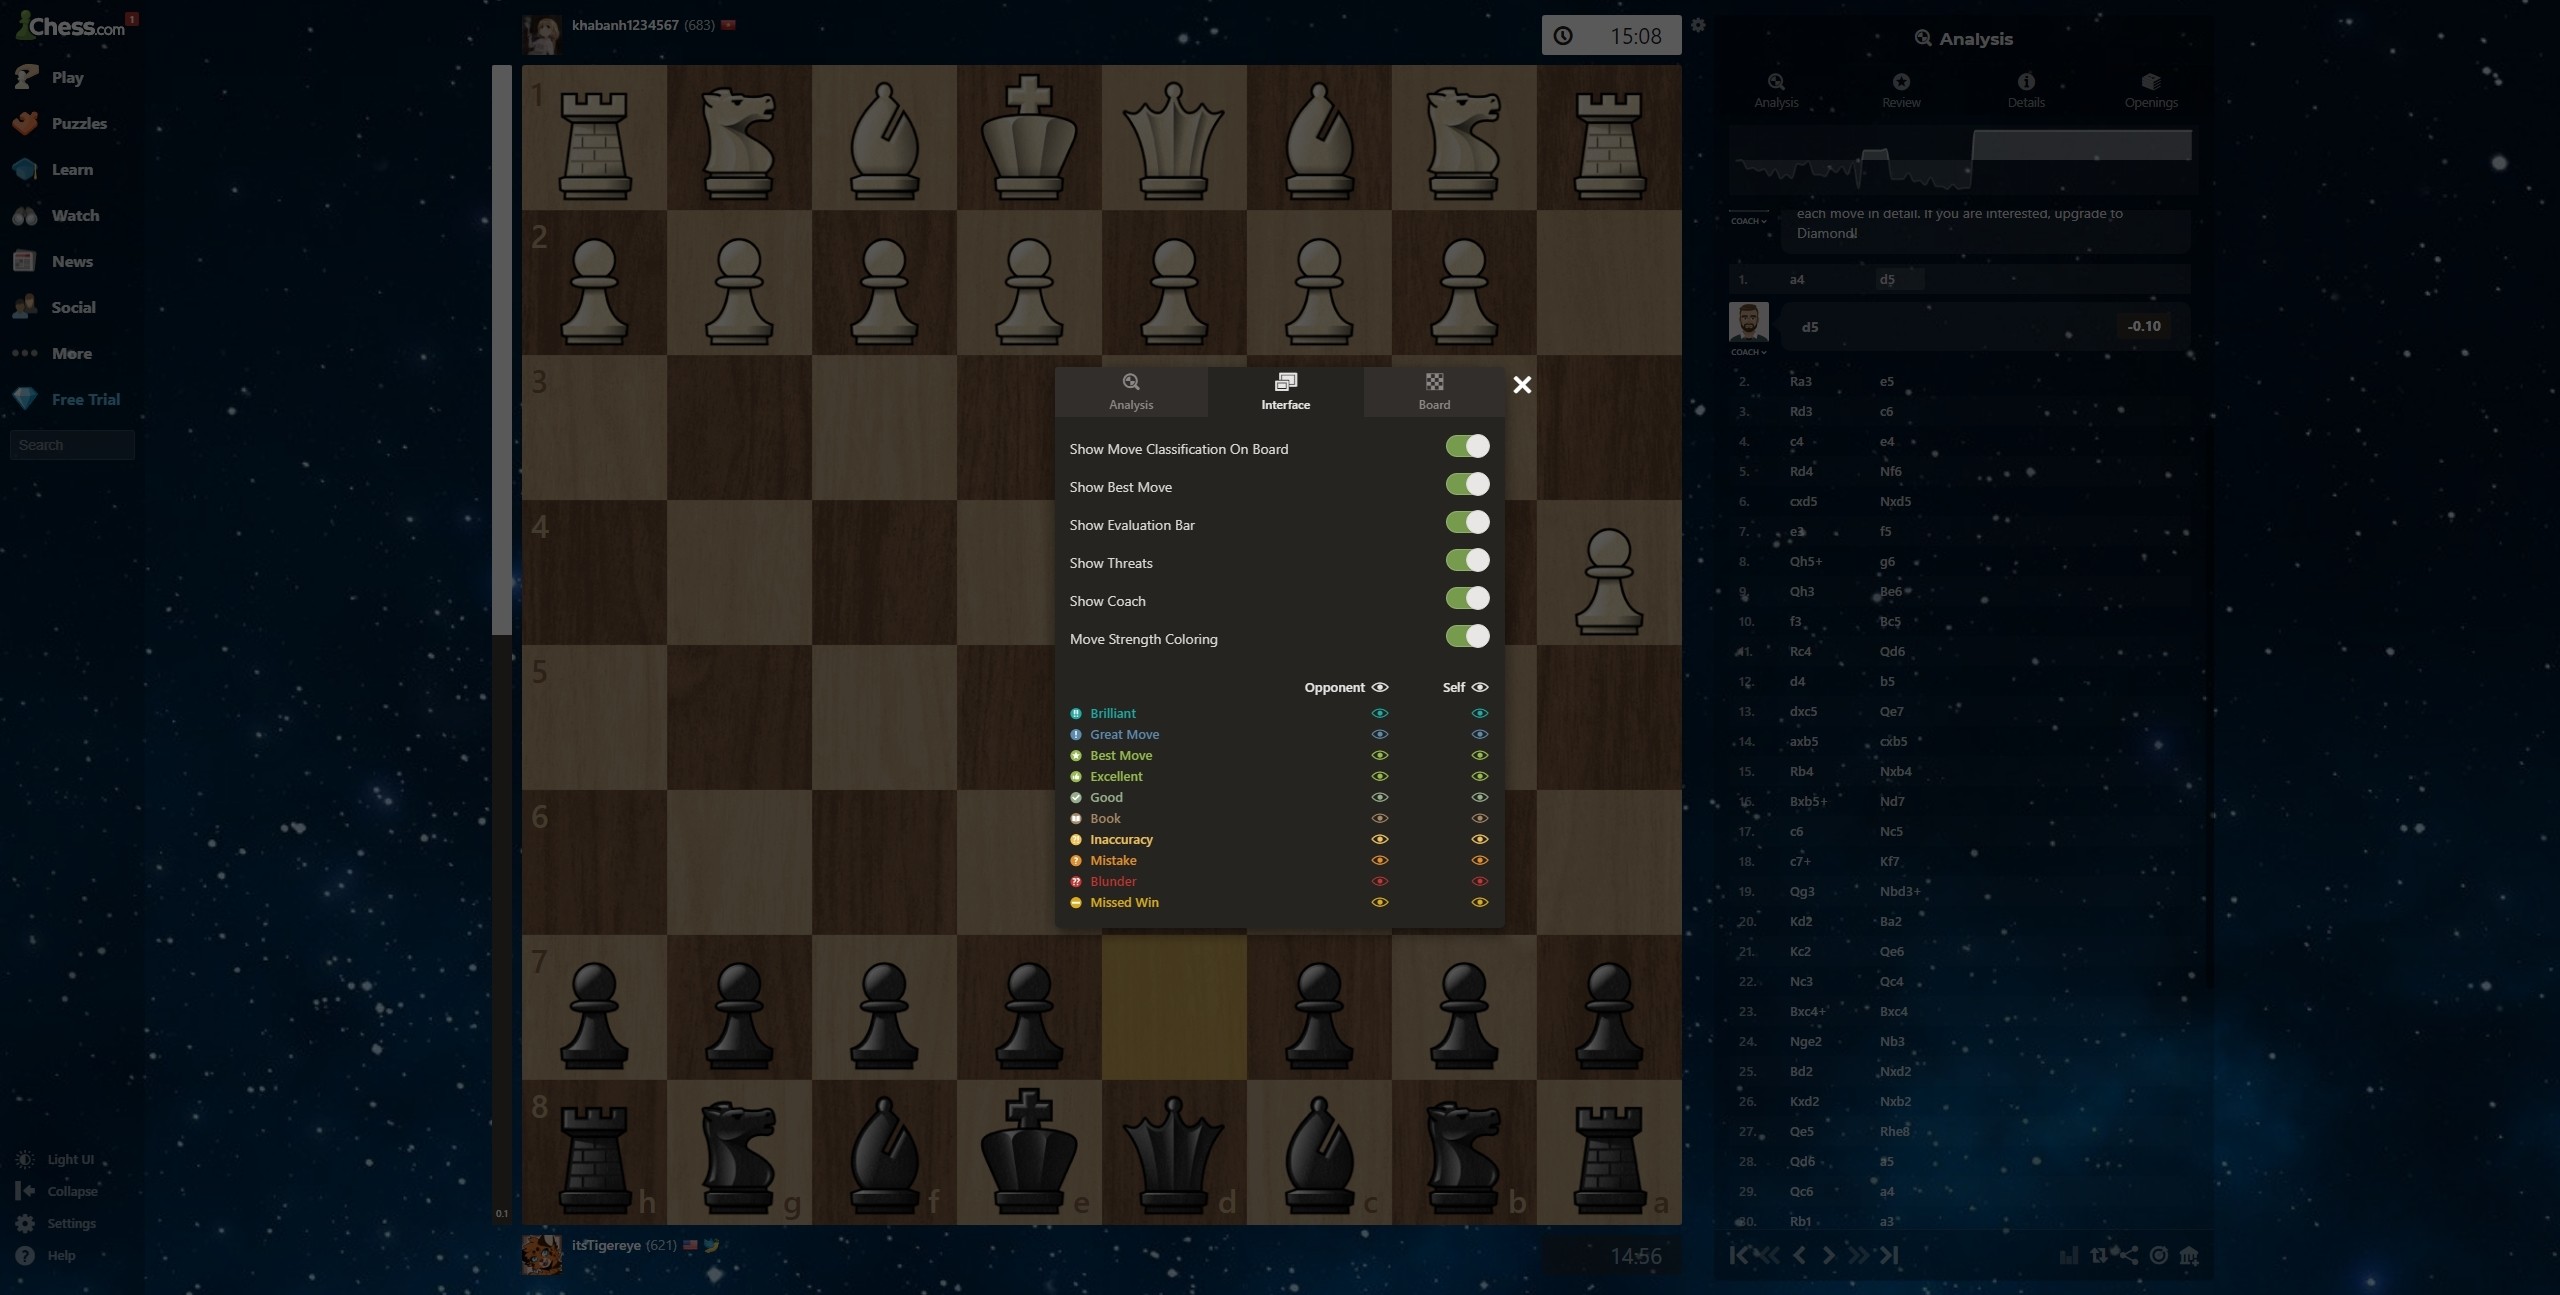 Bug Report} Analysis feature suggesting illegal moves/not evaluating the  position on the board - Chess Forums 